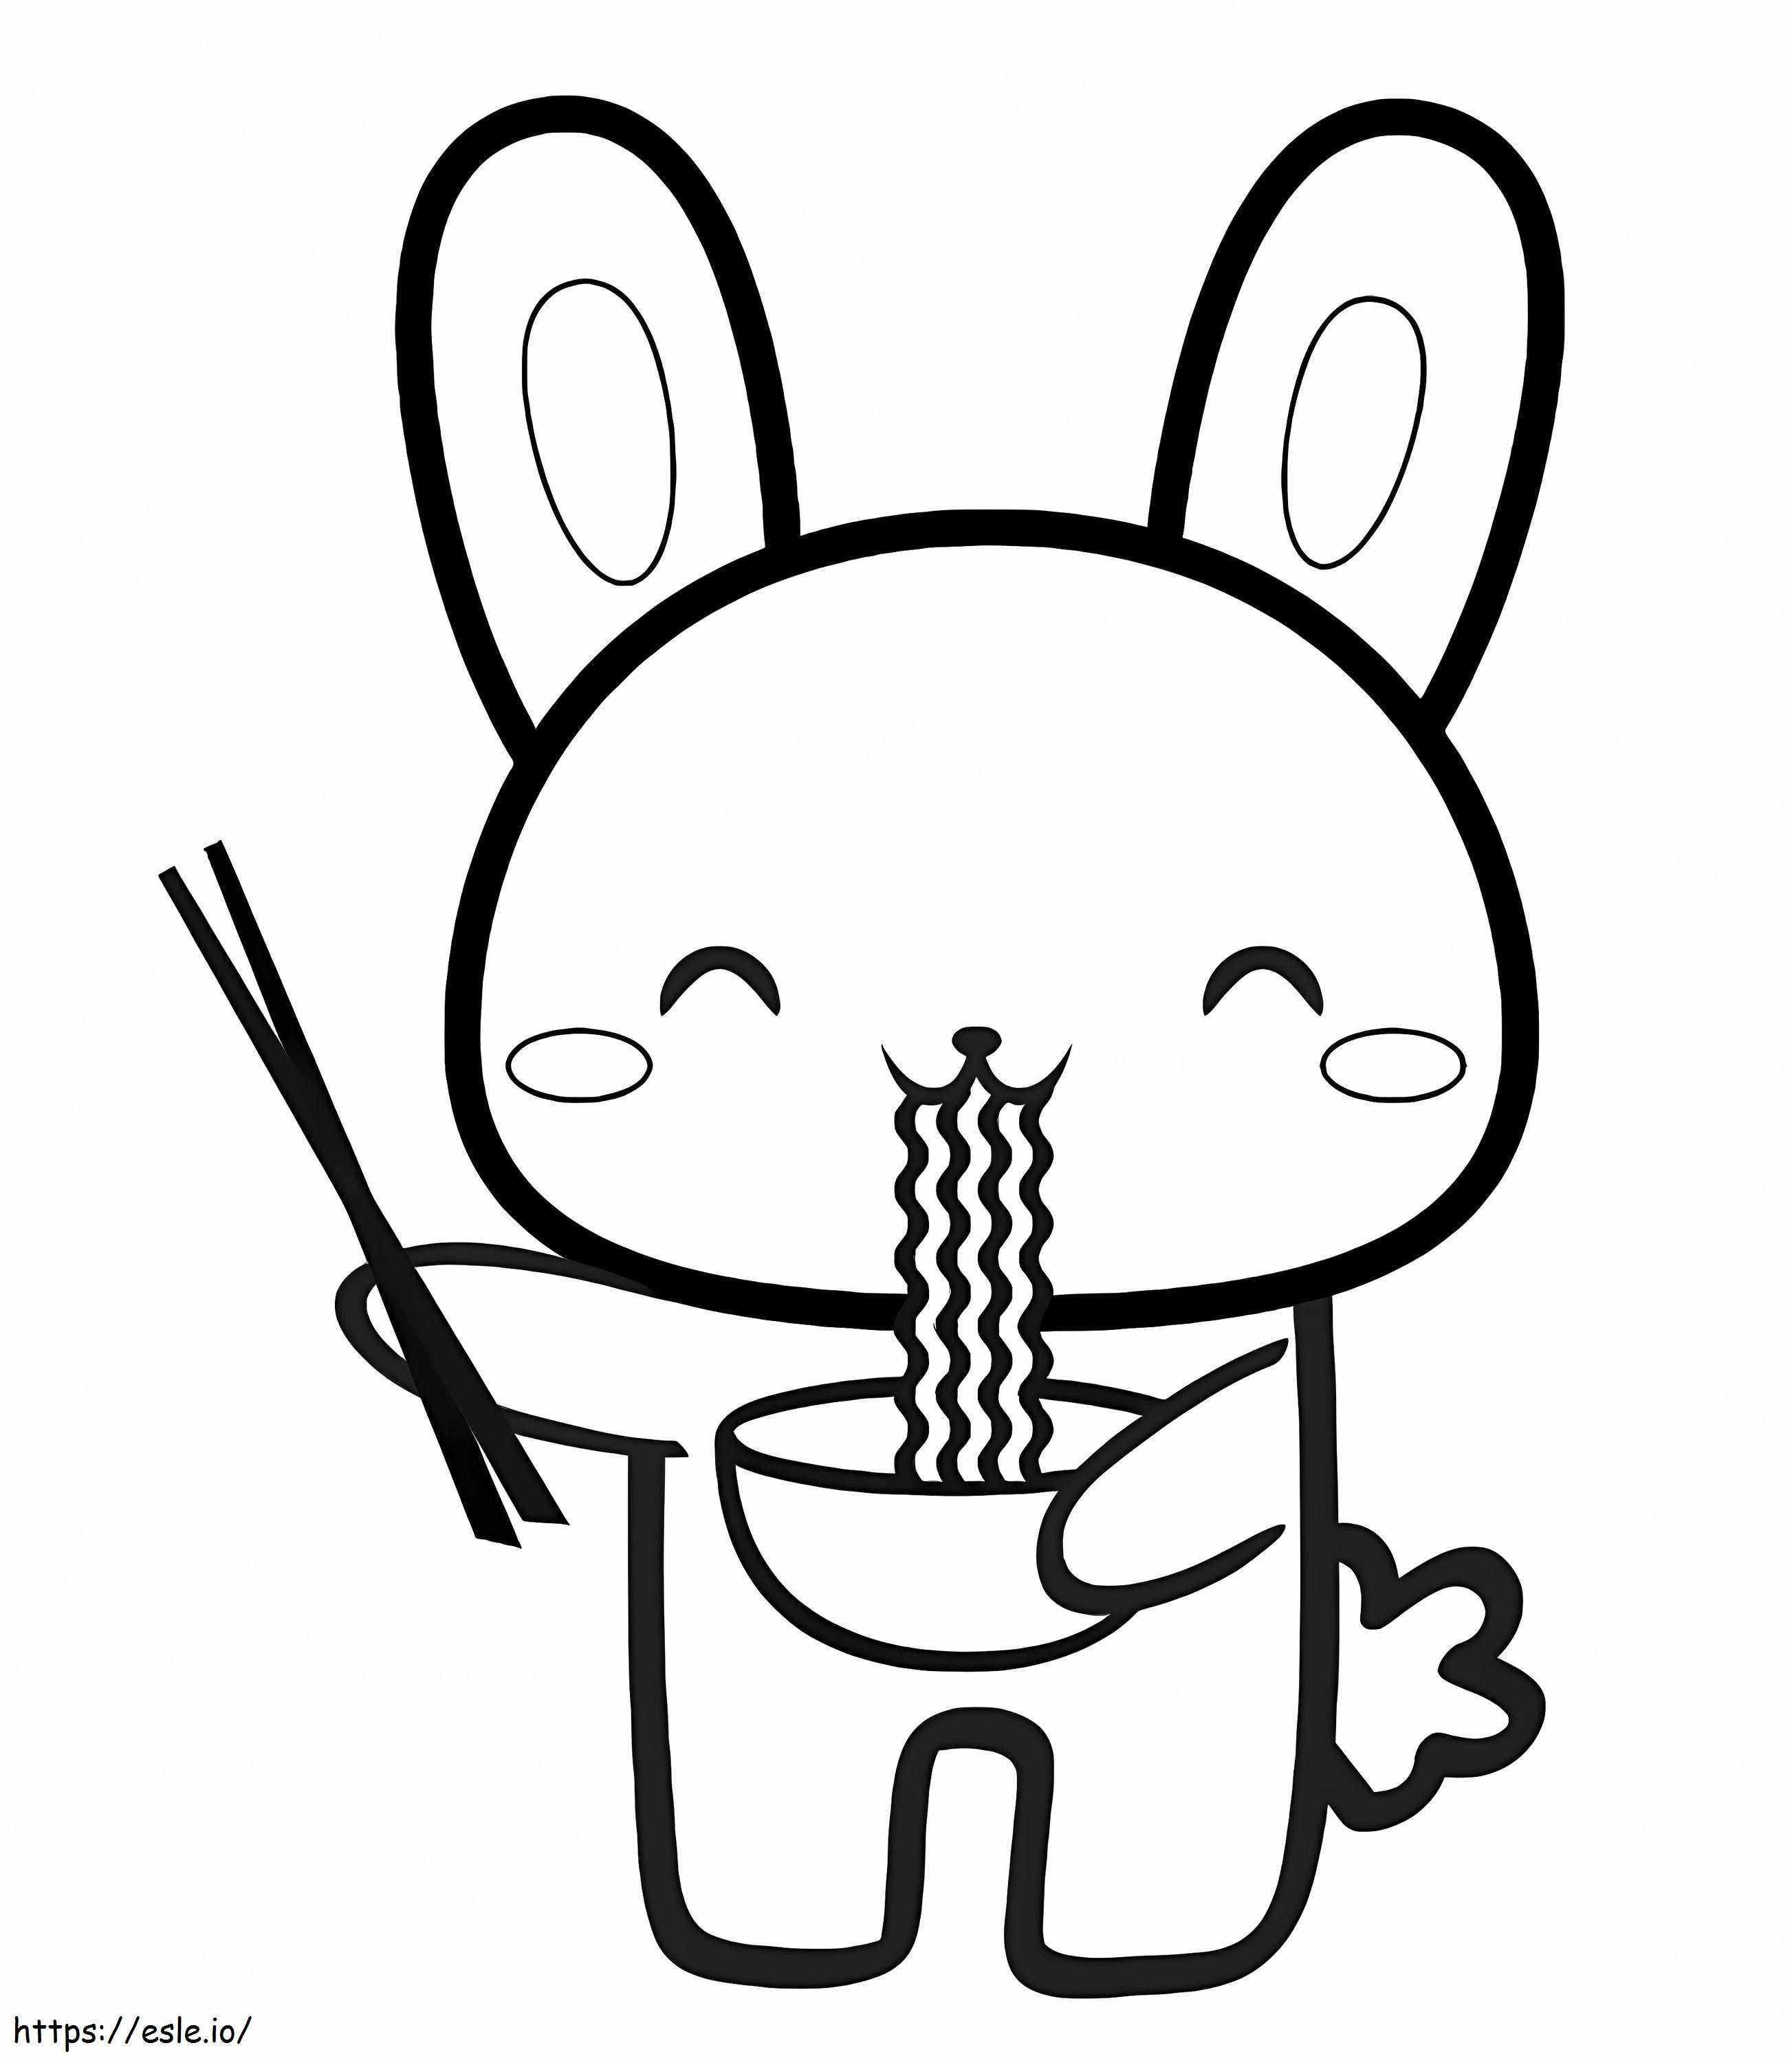 Rabbit Eating Noodles coloring page